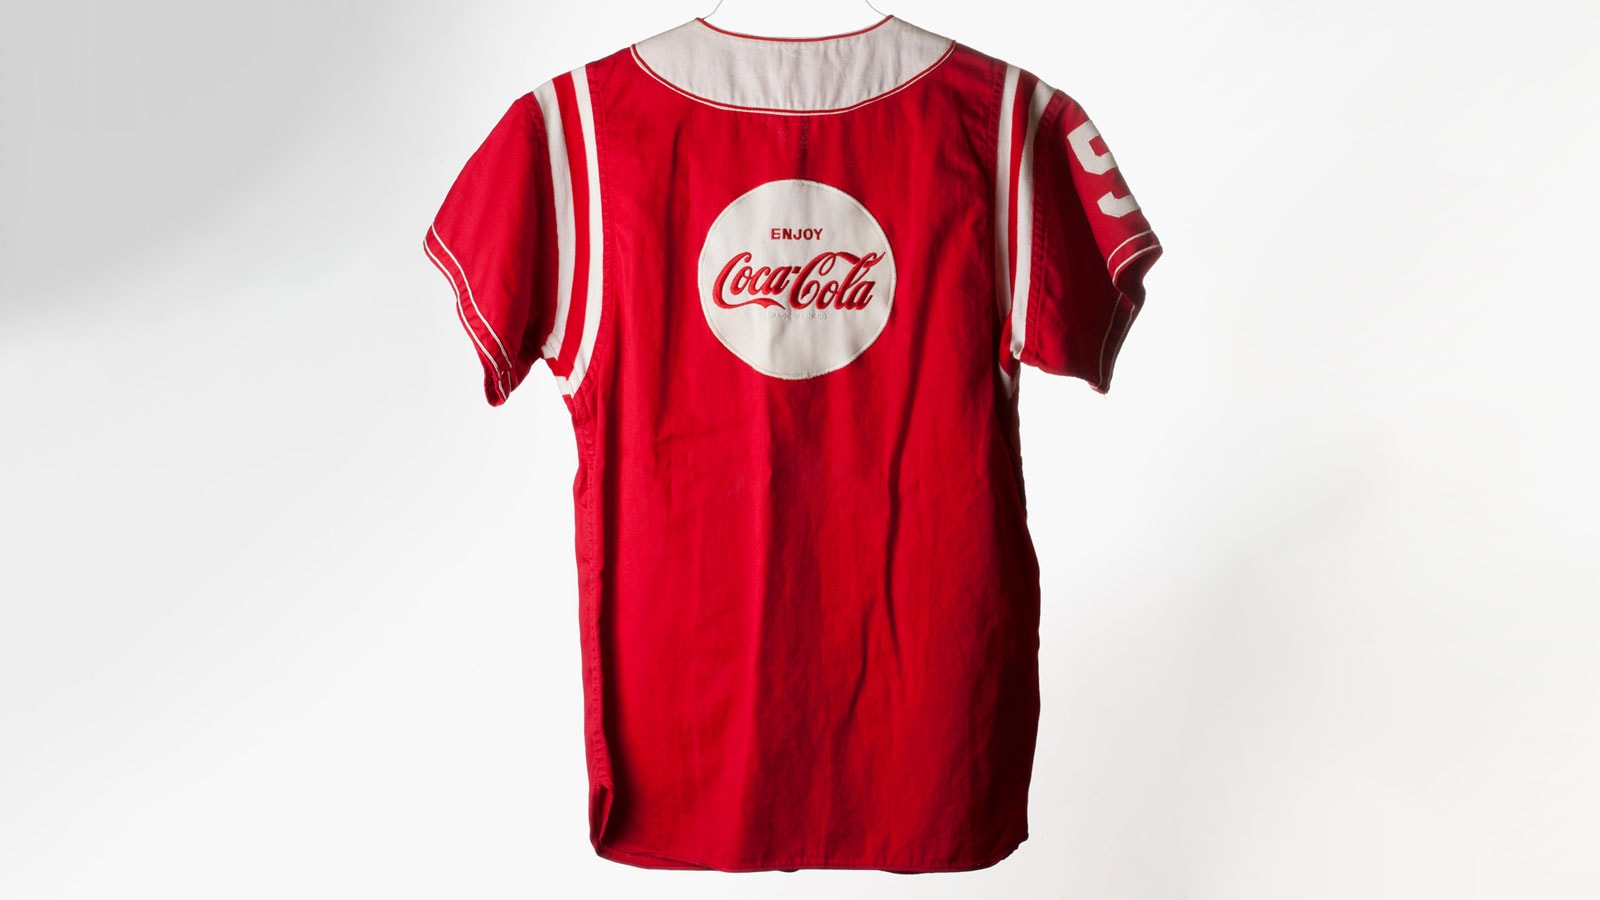 Coca-Cola Head of Fashion Licensing Interview kate dwyer global feature 